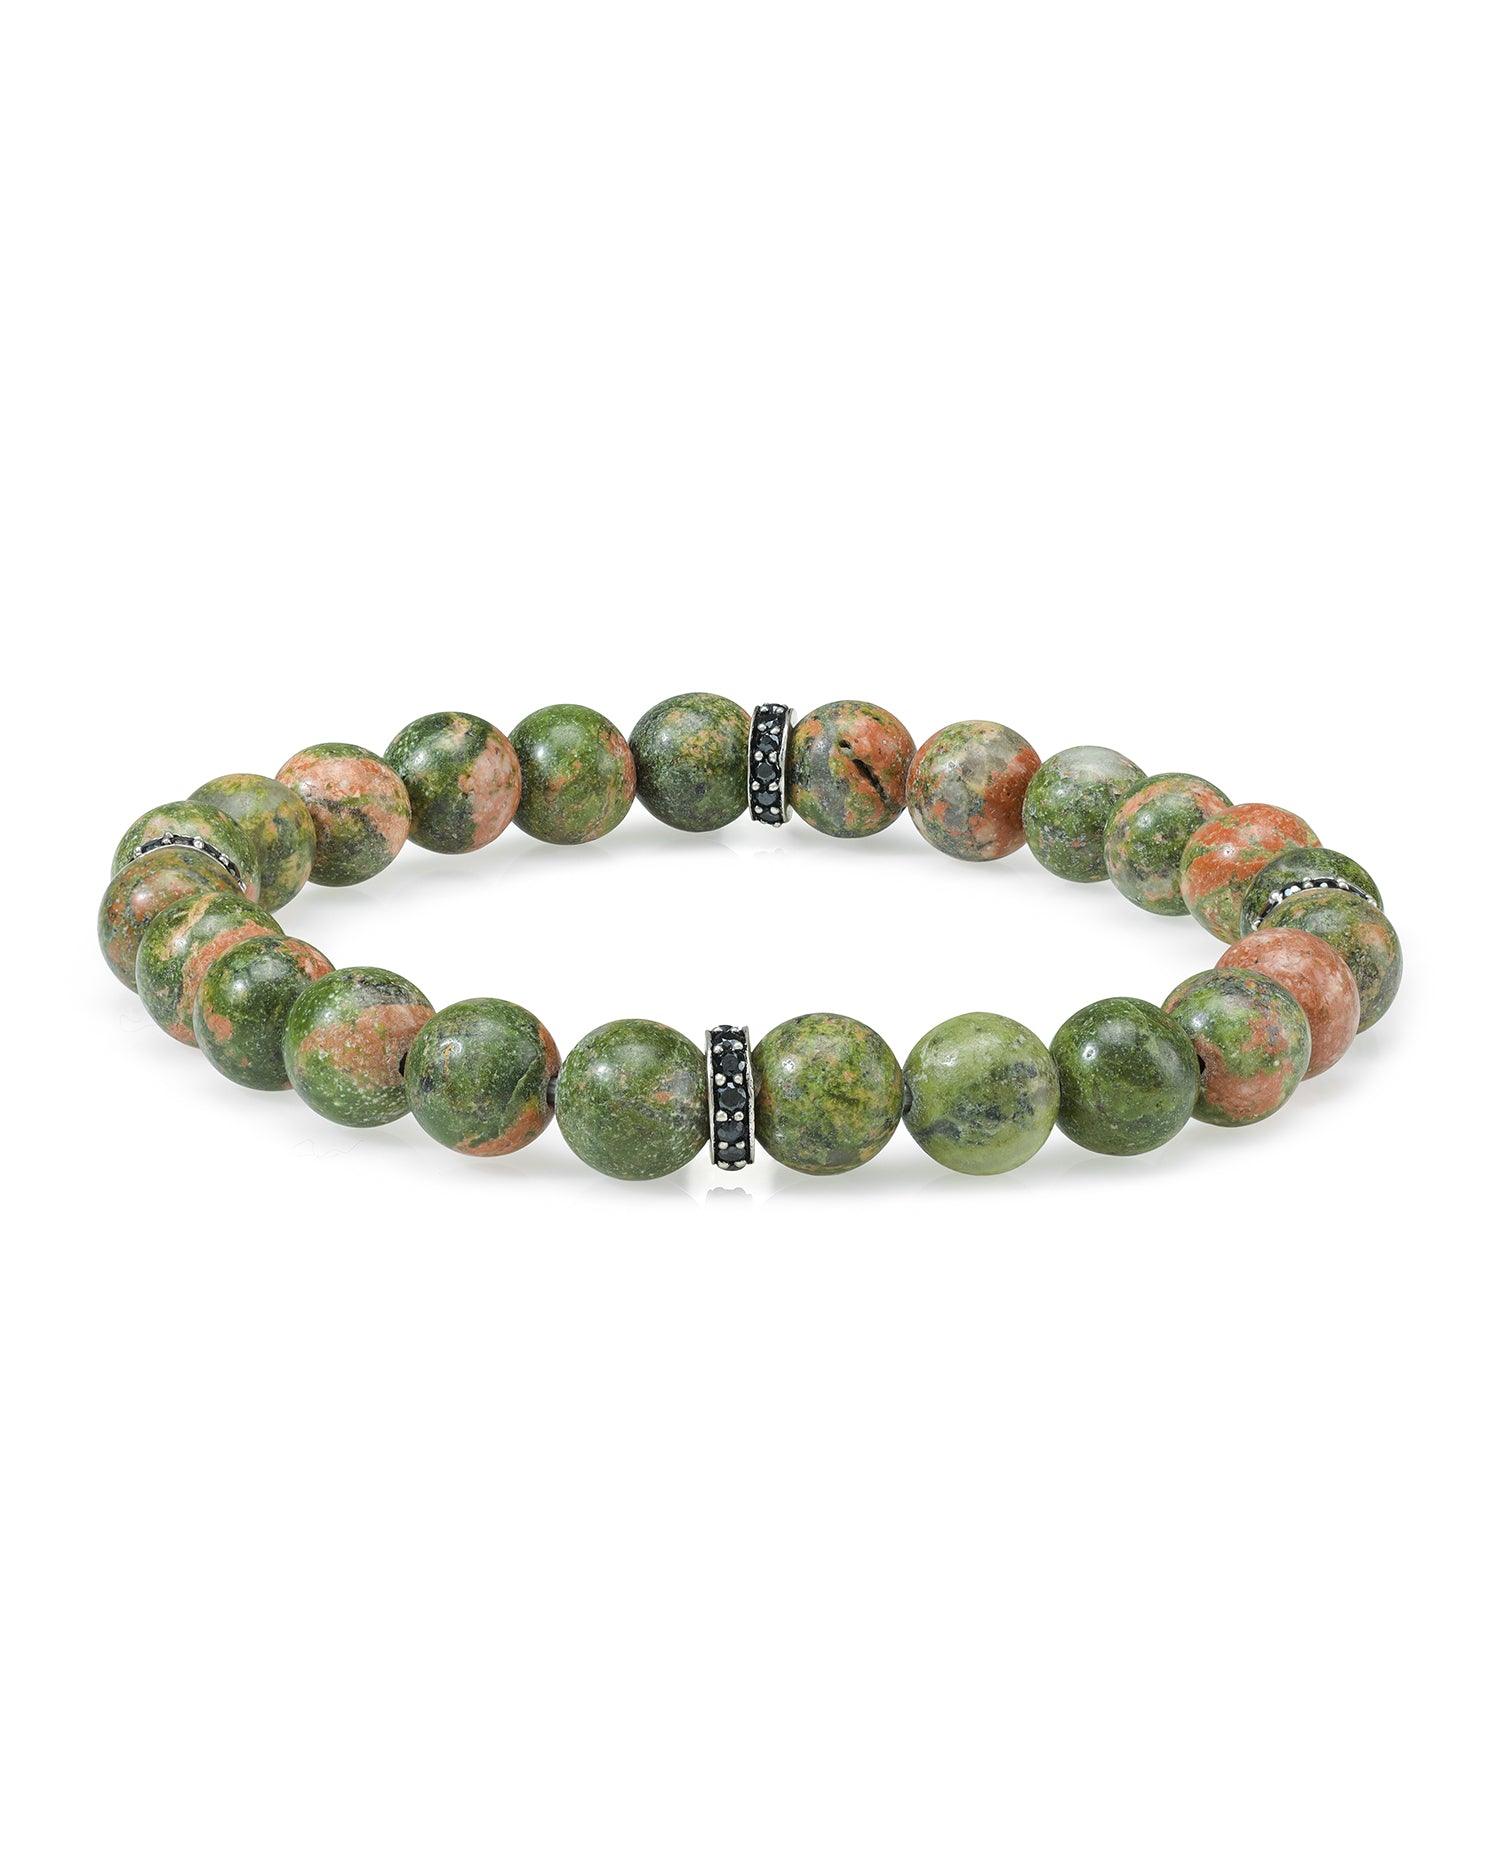 Unakite Black Spinel 925 Sterling Silver Stretchable Beads Bracelet 7" For Men's Jewelry - YoTreasure